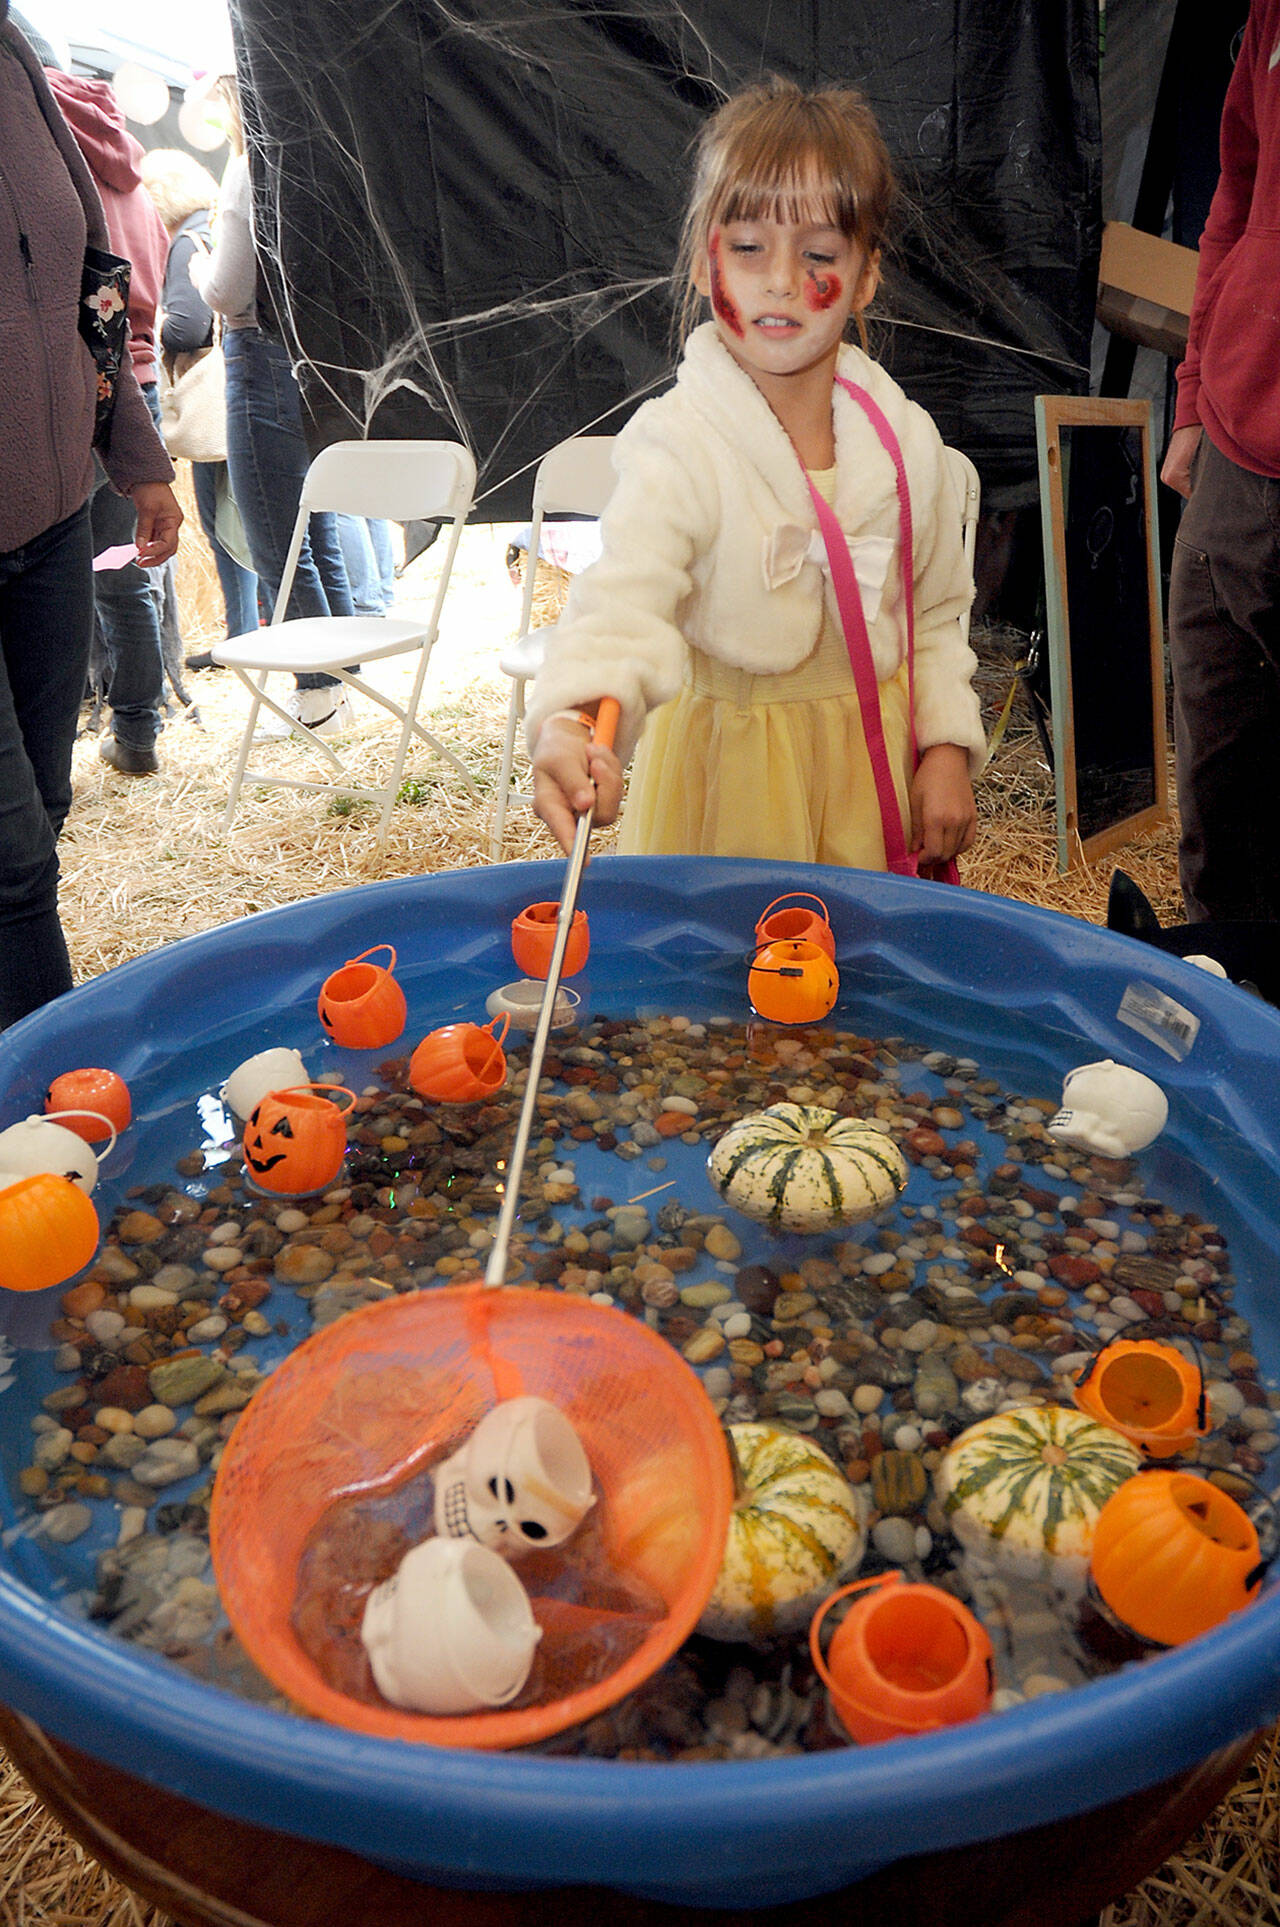 Fern Ollerman, 7, of Sequim nets skulls in a fish tank hoping for treats during Saturday’s Scaredy Cats Howl-o-ween Fall Festival & Haunted House at the Olympic Peninsula Humane Society’s Kitty City campus near Carlsborg. The event featured food, music, treats and a variety of spooky decor, including an animatronic haunted house. The festival was a benefit for the society’s operations. (Keith Thorpe/Peninsula Daily News)